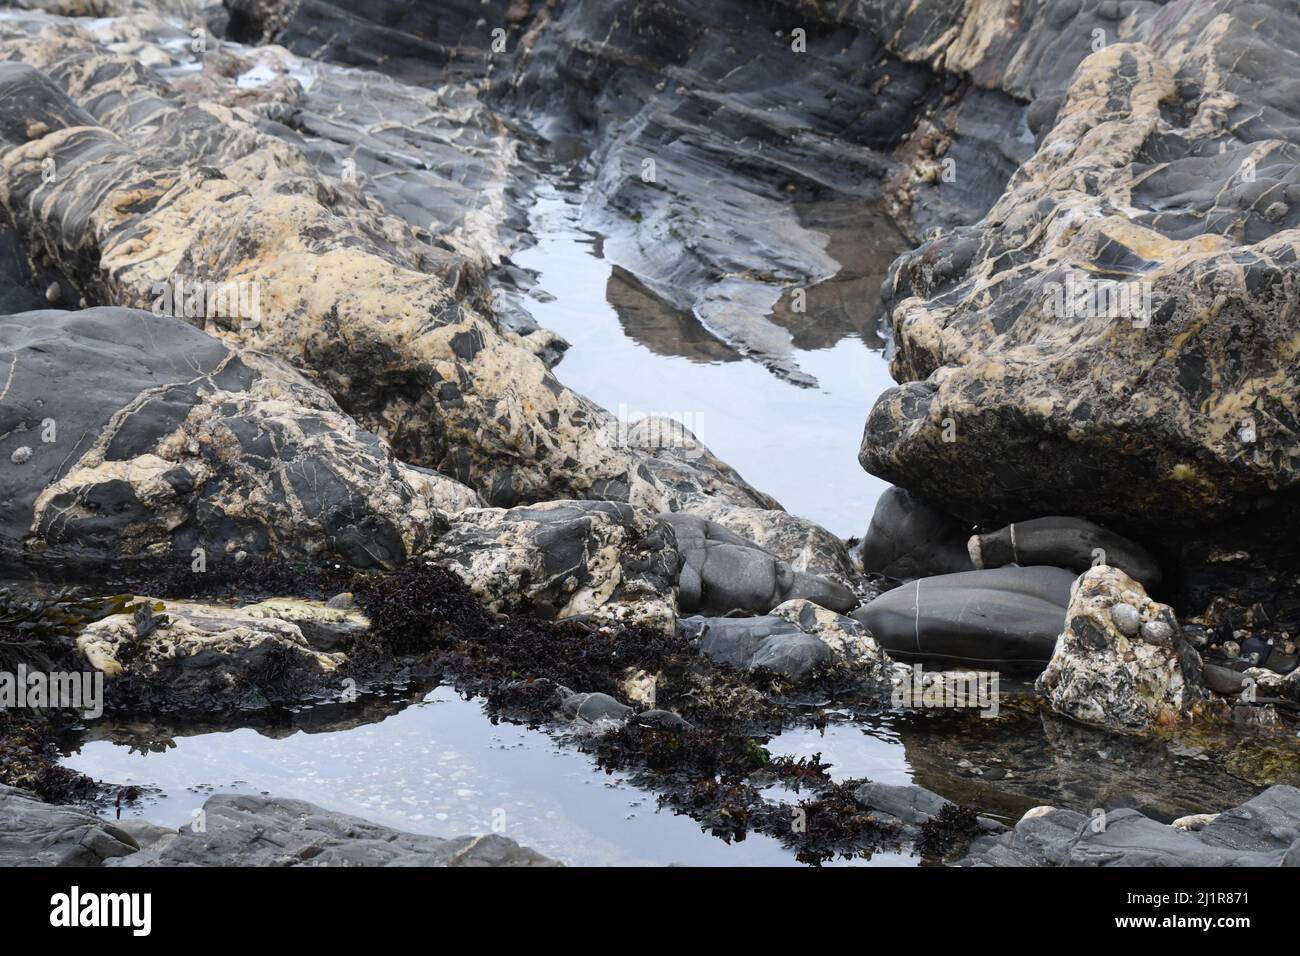 Crackington Haven beach showing the geological formation of mudstones and sandstones with veins of calcite and quartz.Cornwall.UK Stock Photo